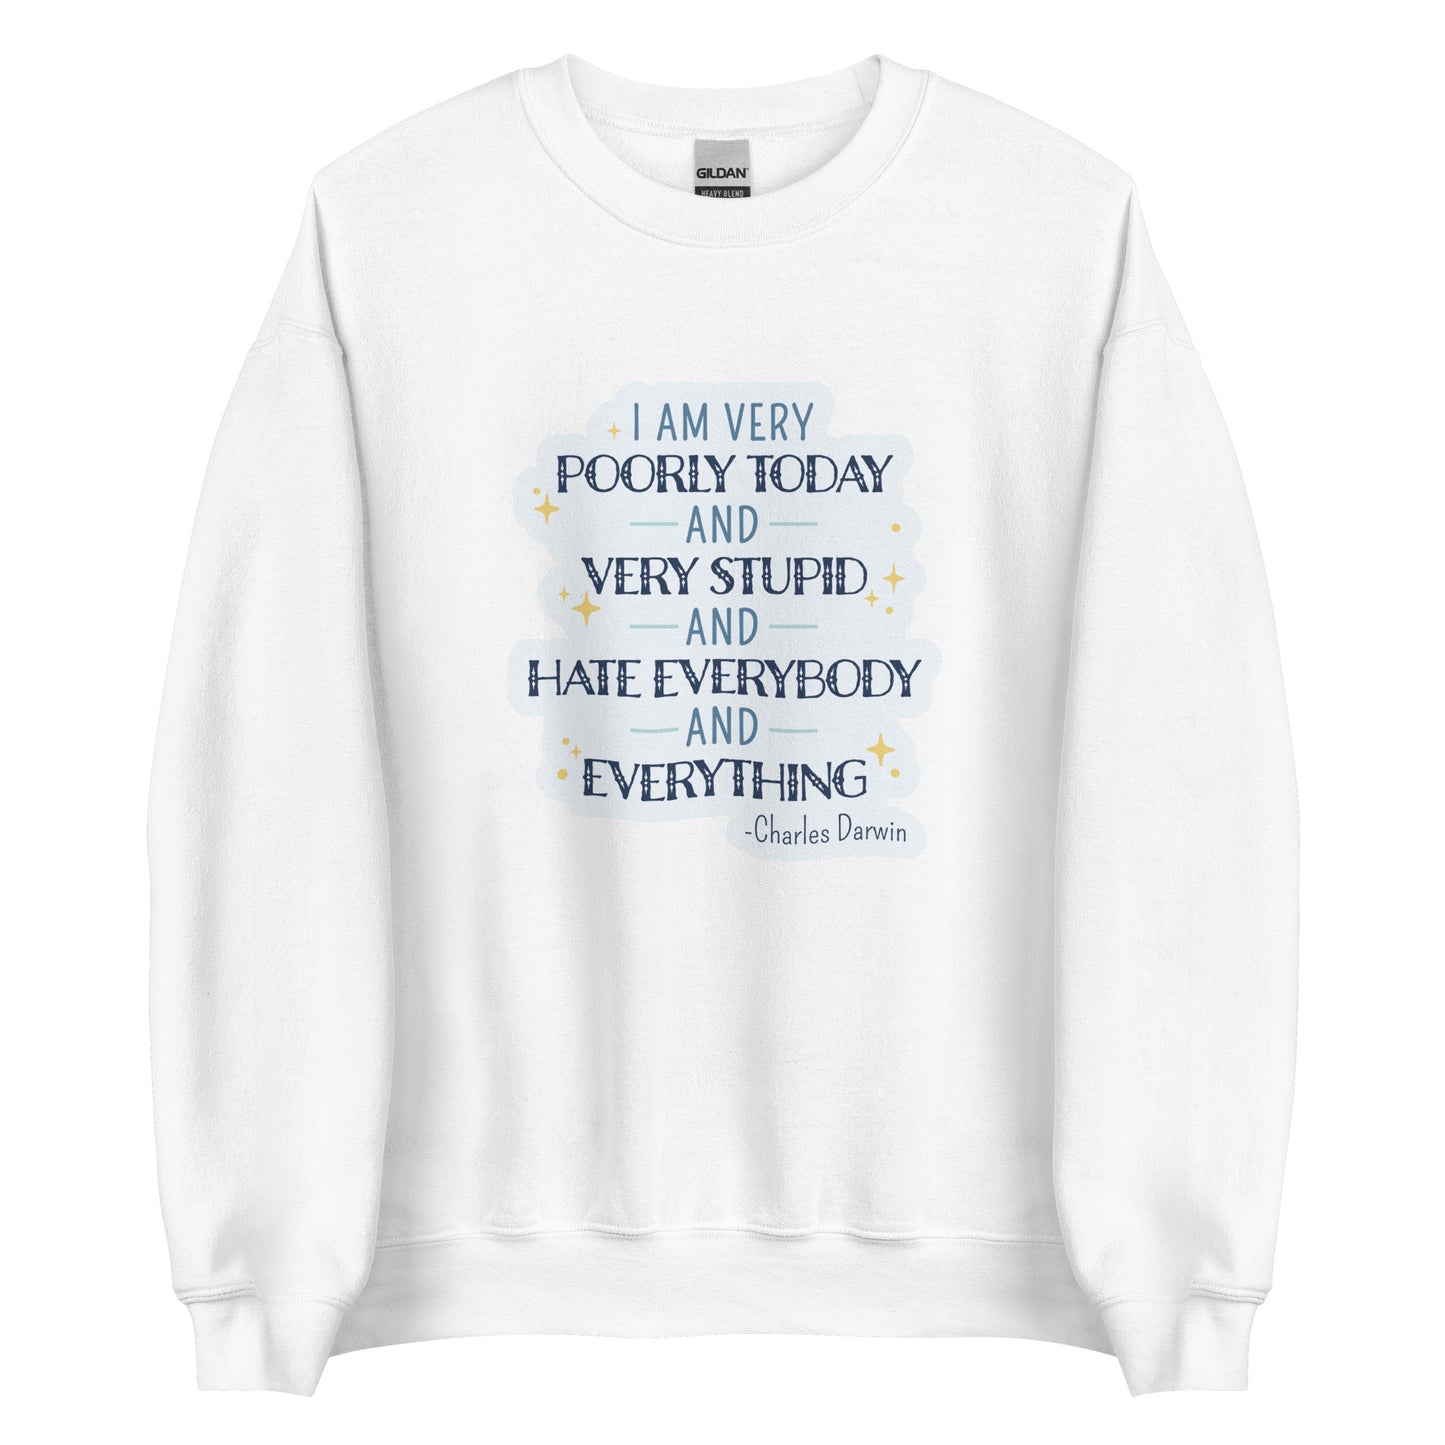 A white crewneck sweatshirt featuring a stylized quote from Charles Darwin in white and blue text. The quote reads "I am very poorly today and very stupid and hate everybody and everything."